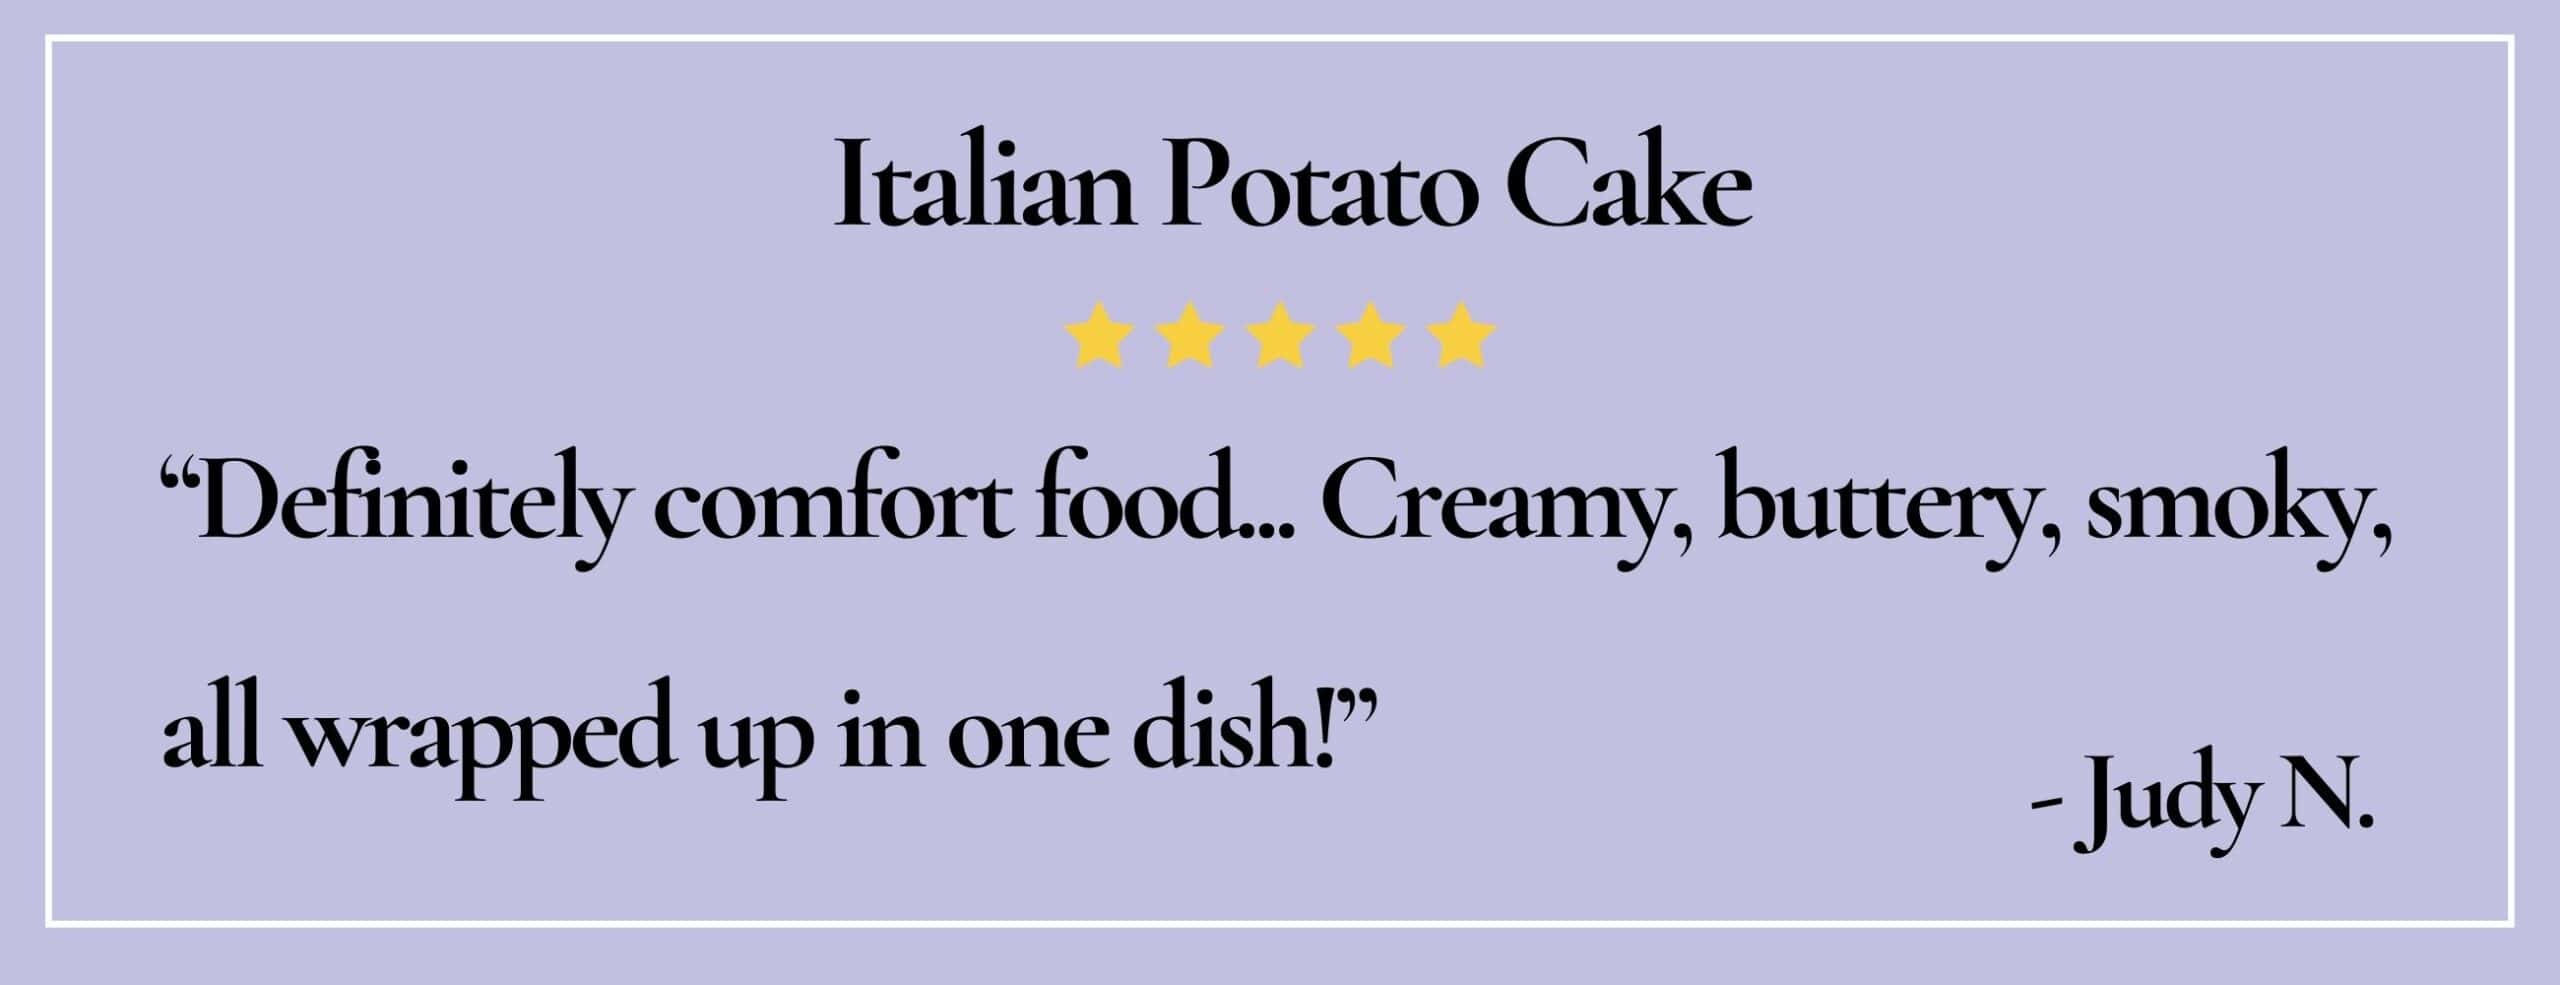 text box with quote:"Definitely comfort food... Creamy, buttery, smoky..."- Judy N.